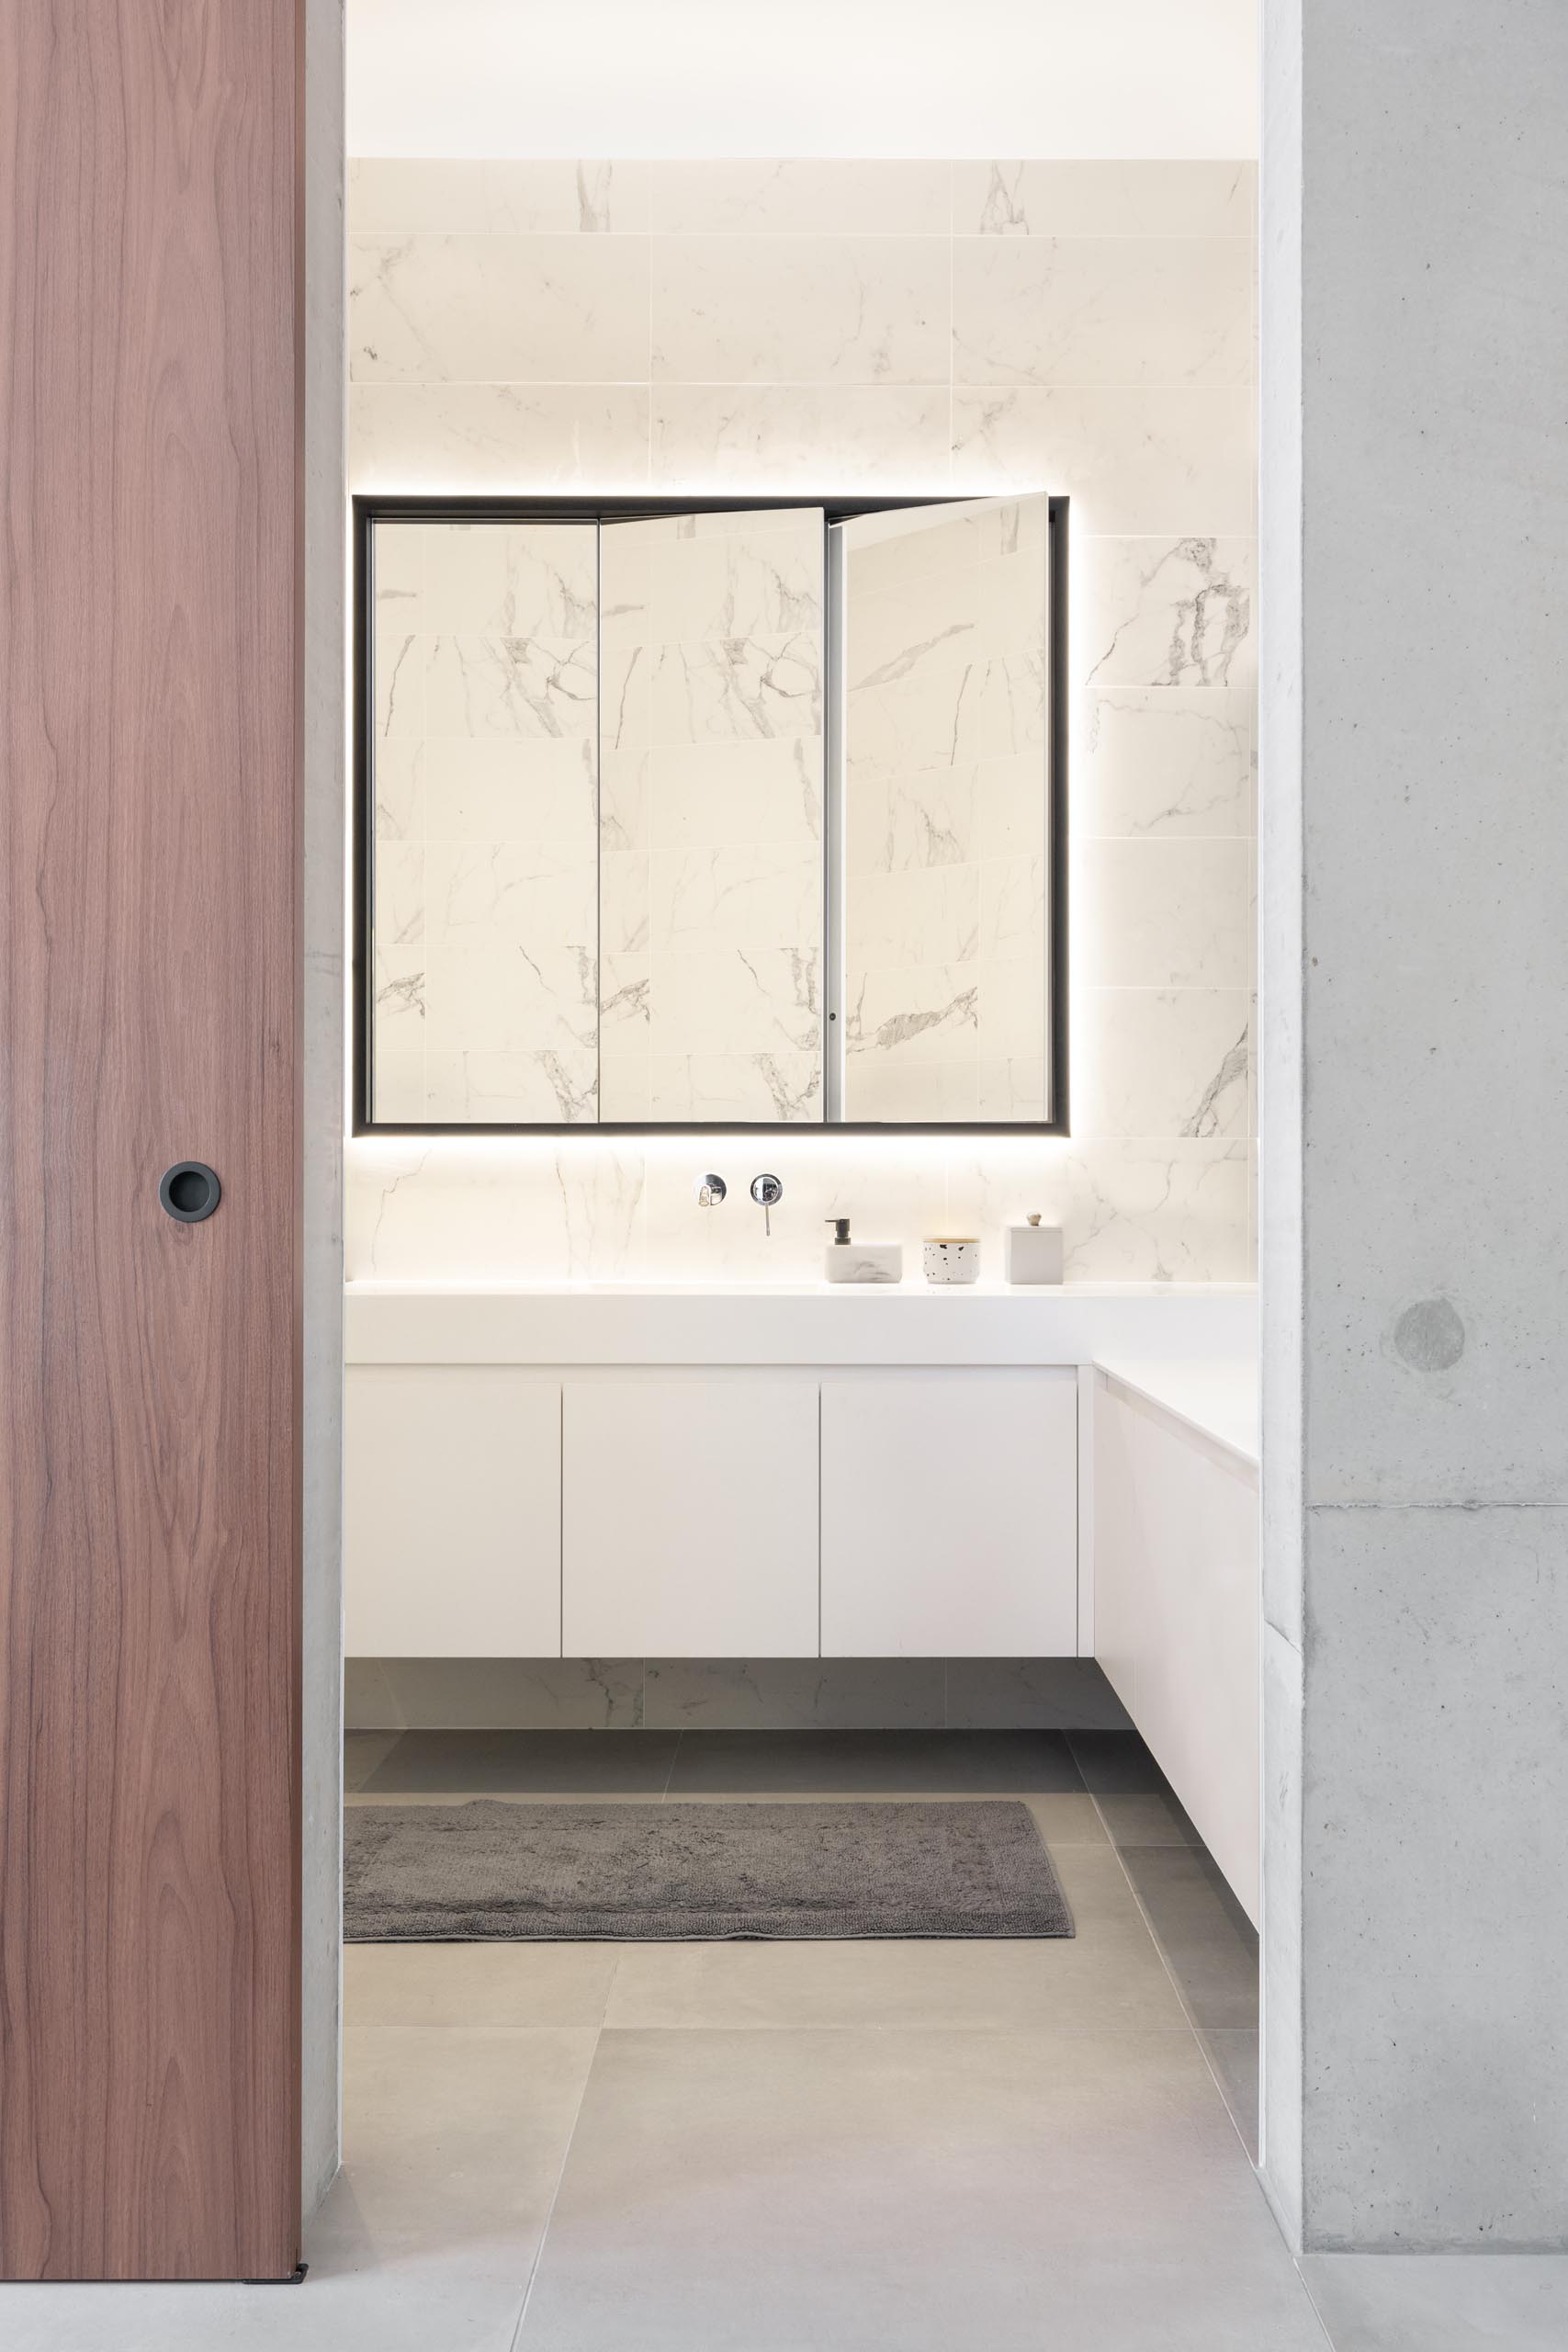 A modern bathroom with light colored walls, white cabinetry, a  large mirror, and built-in bathtub.